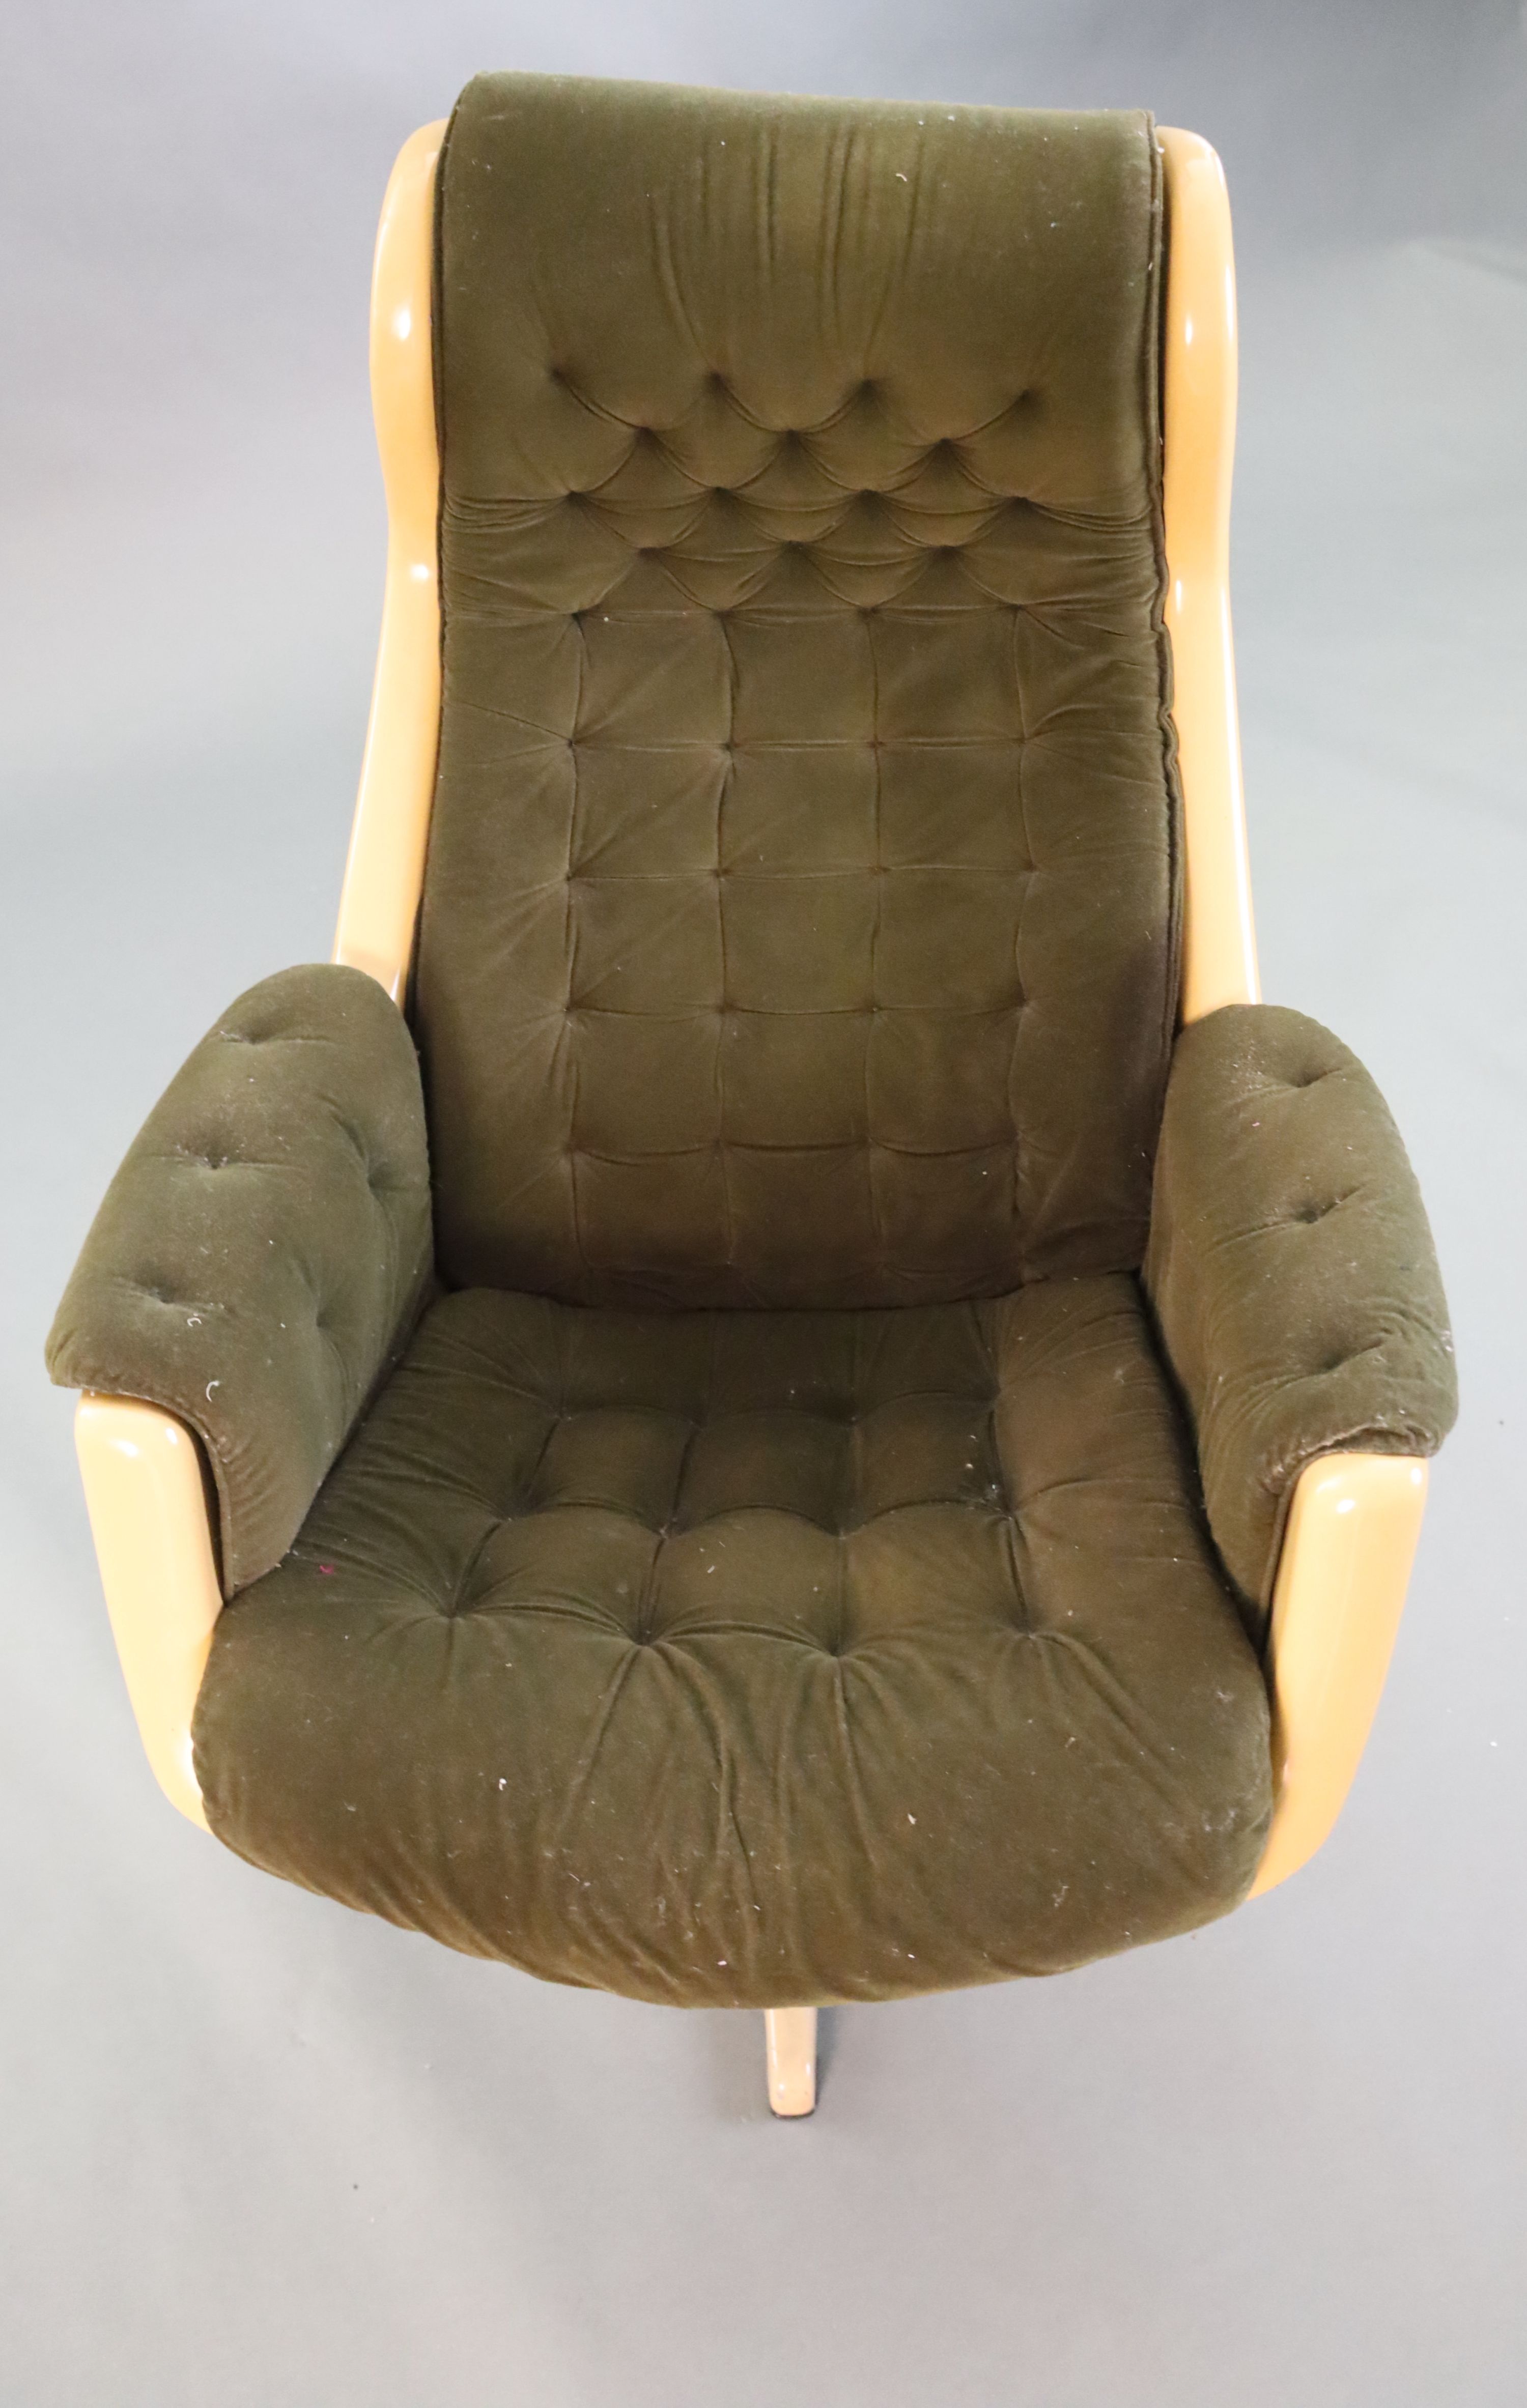 A Svensson and Sandstrom Swedish moulded plastic chair, upholstered in buttoned brown fabric with - Image 2 of 3